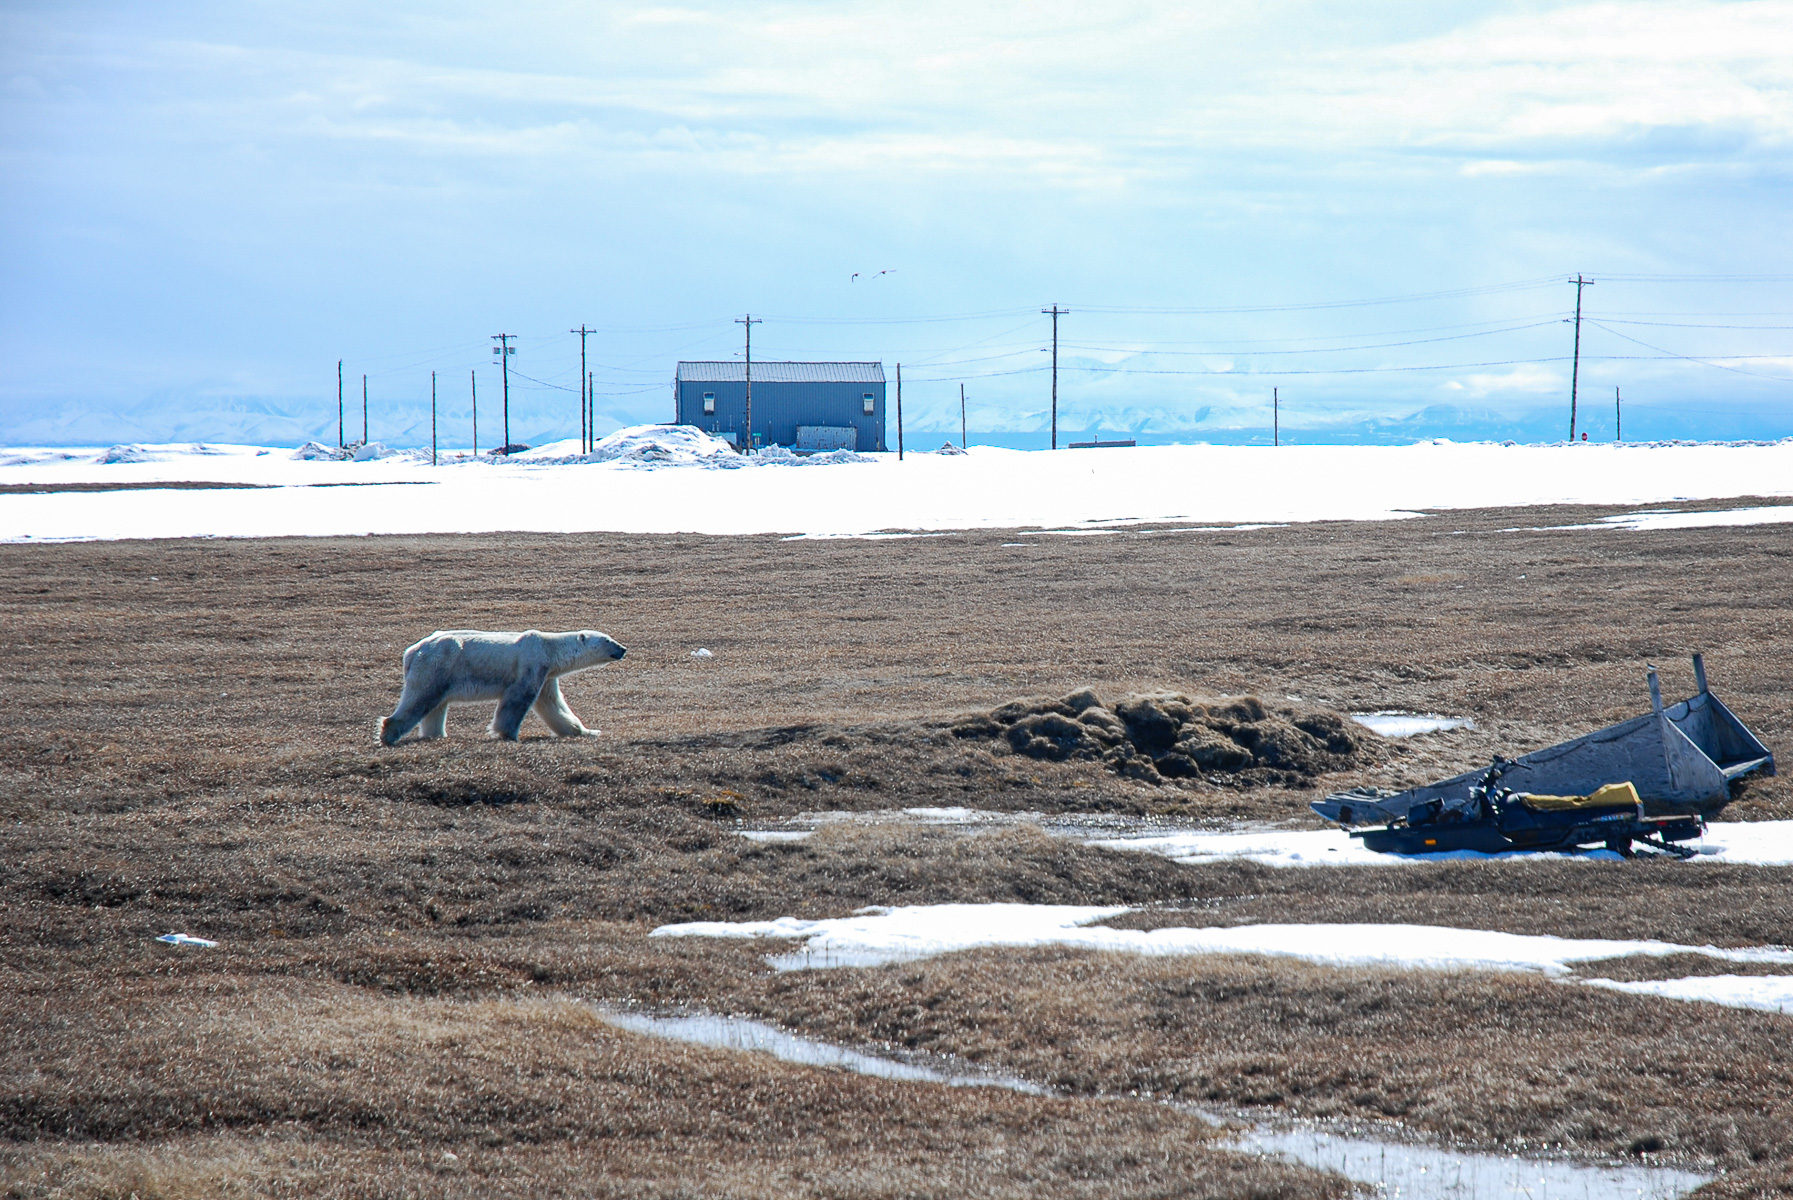 a polar bear walks along the edge of a town. a building in the background and a snowmachine in the foreground